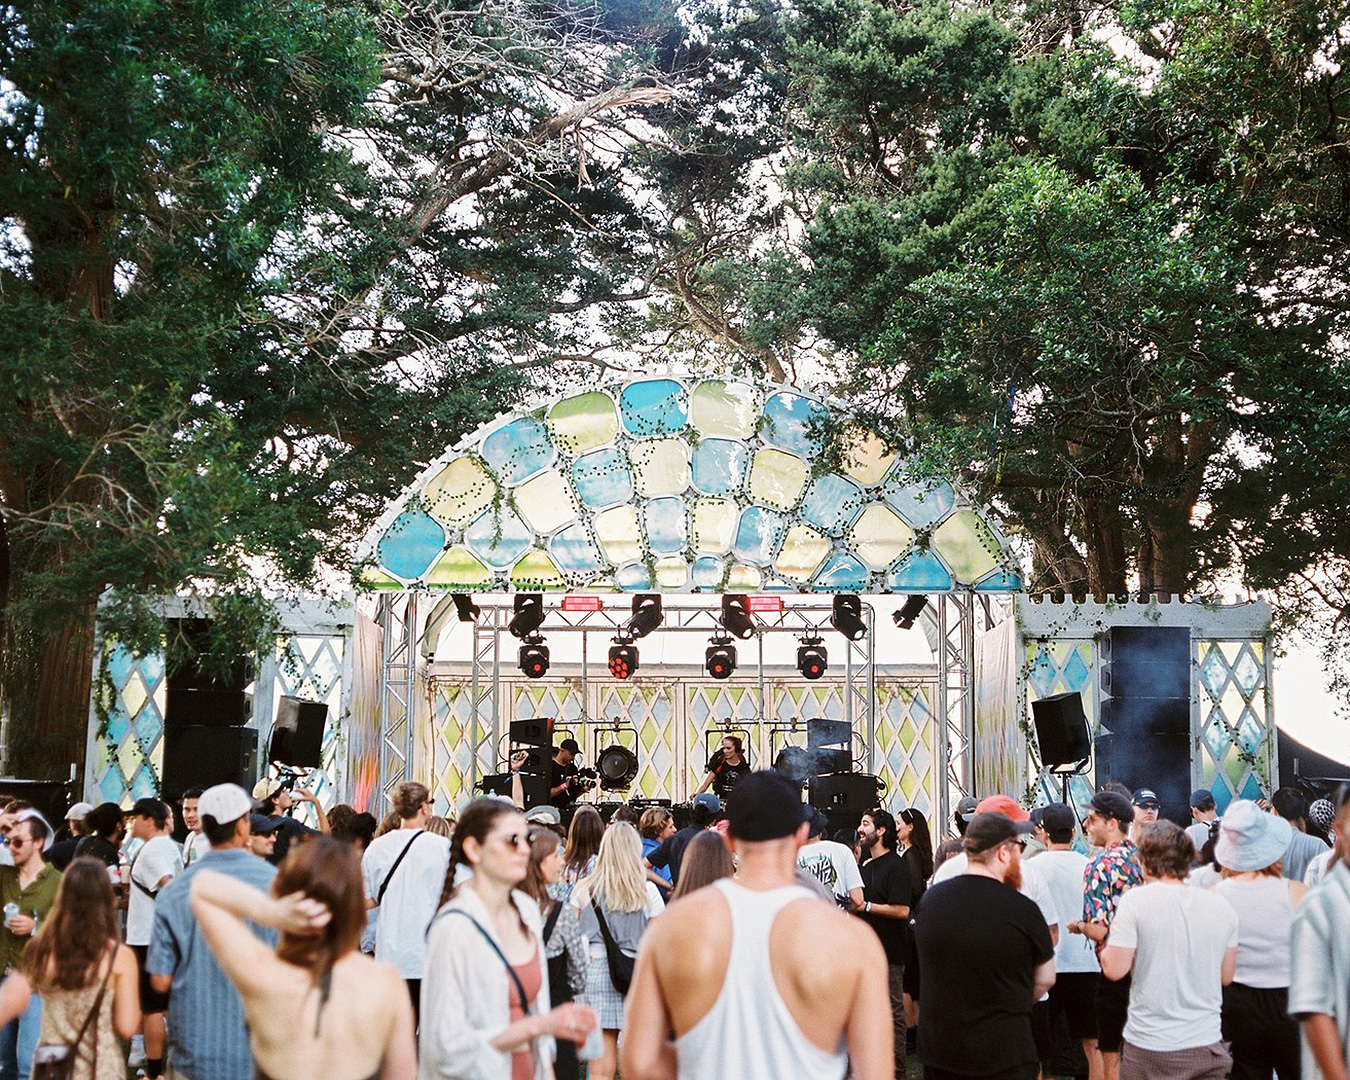 People milling in front of the stage at 121 Festival.